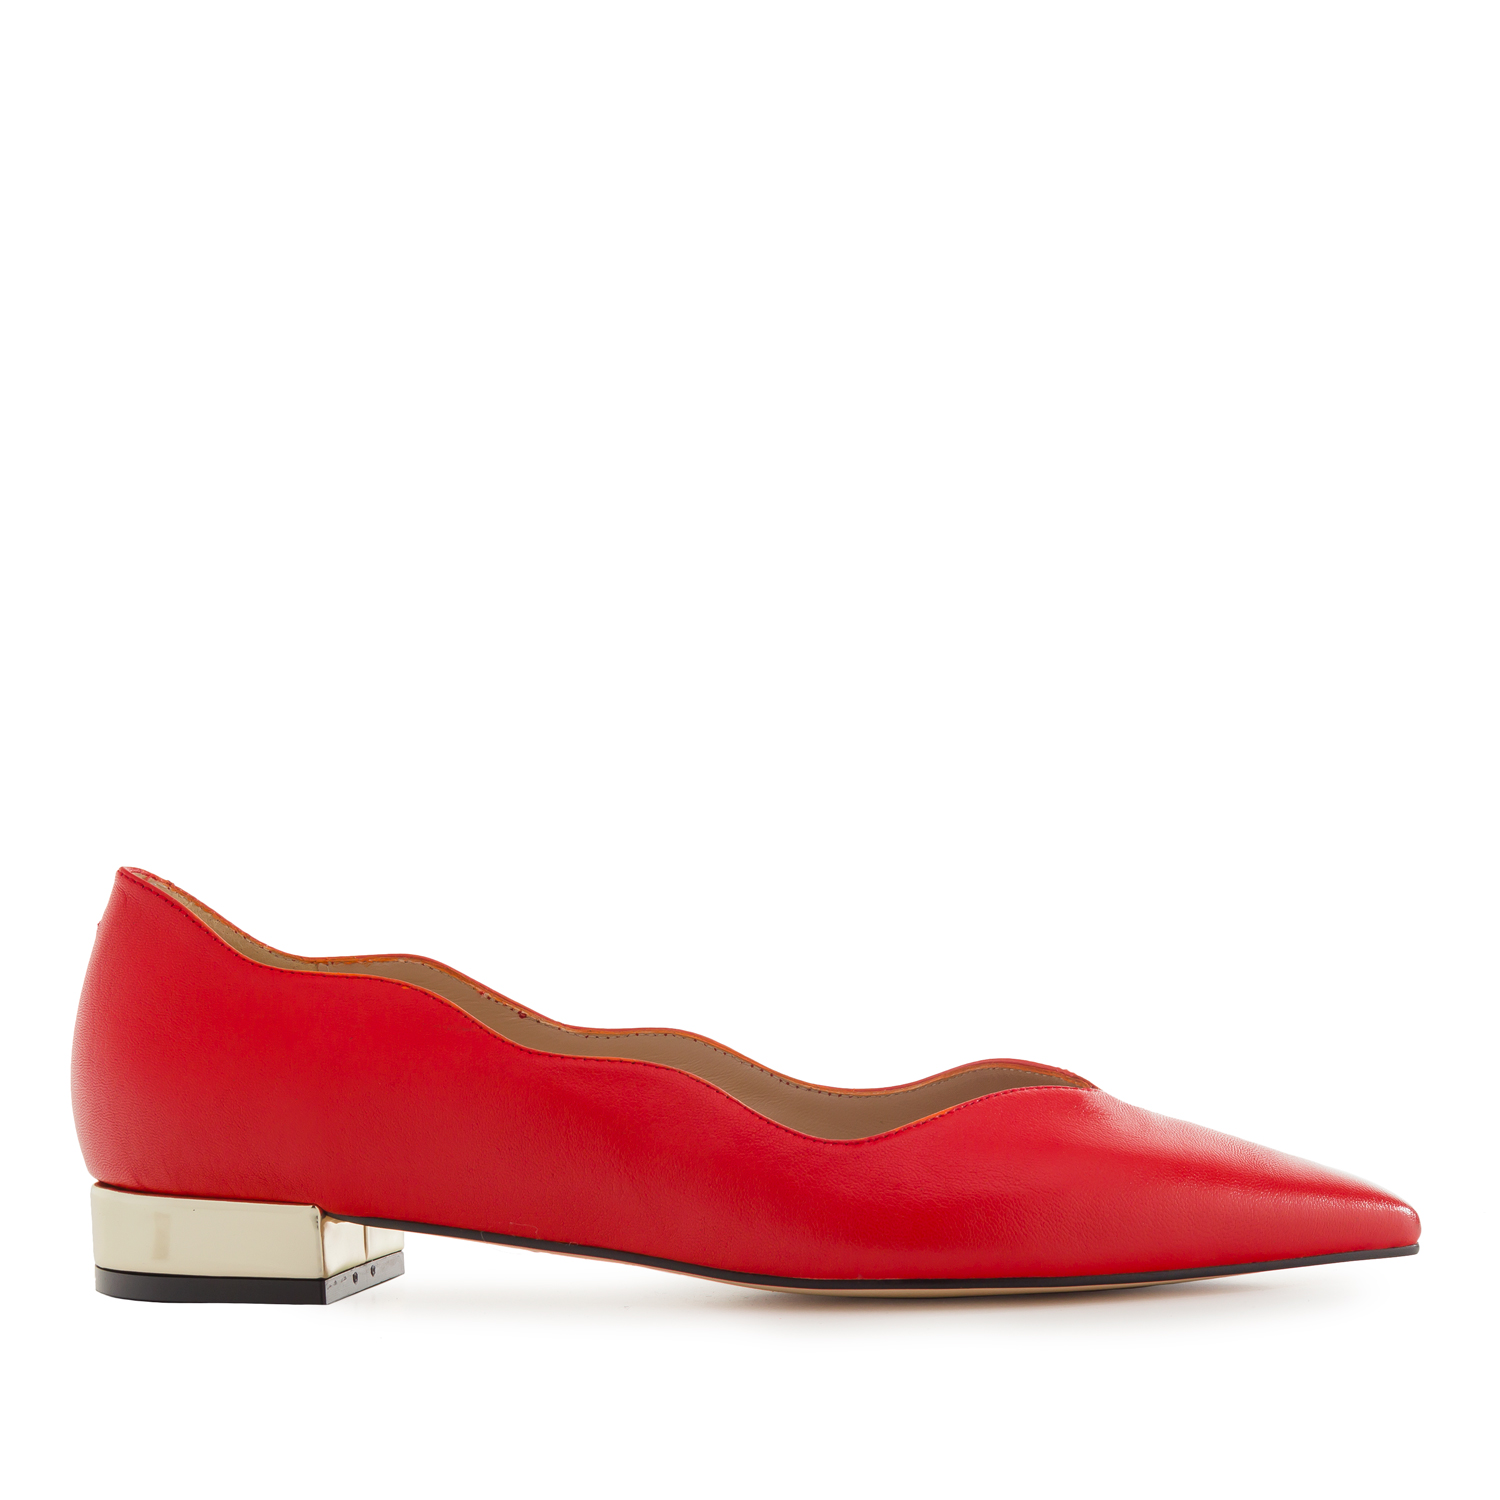 Waved Upper Ballet Flats in Red Nappa Leather 